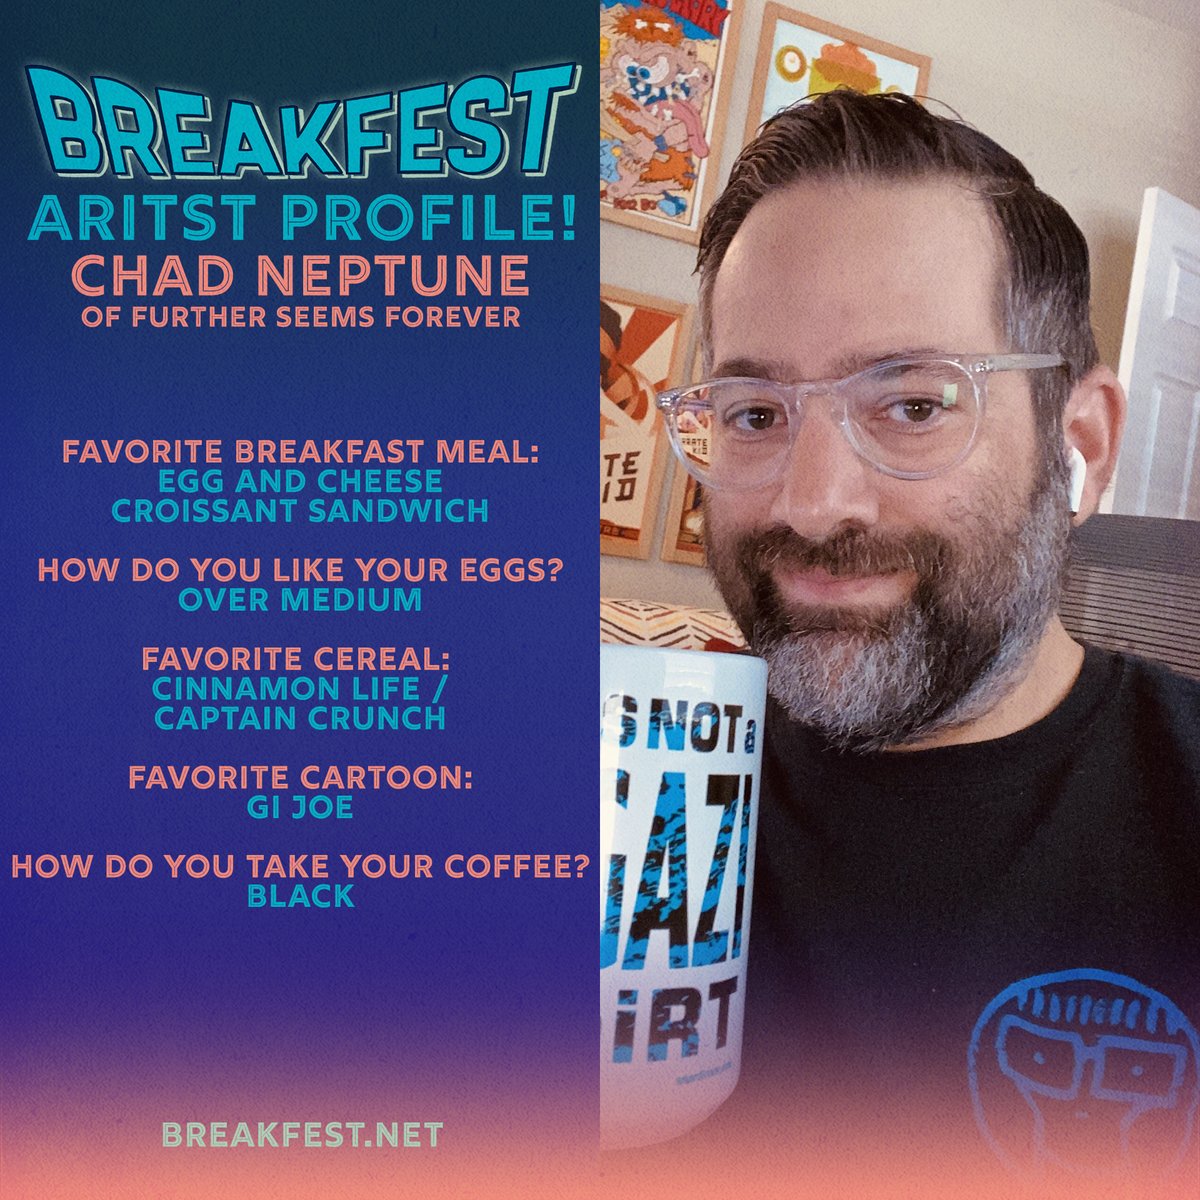 Chad from Further Seems Forever has great taste in breakfast foods and even better taste in posters, coffee mugs, and t-shirts.